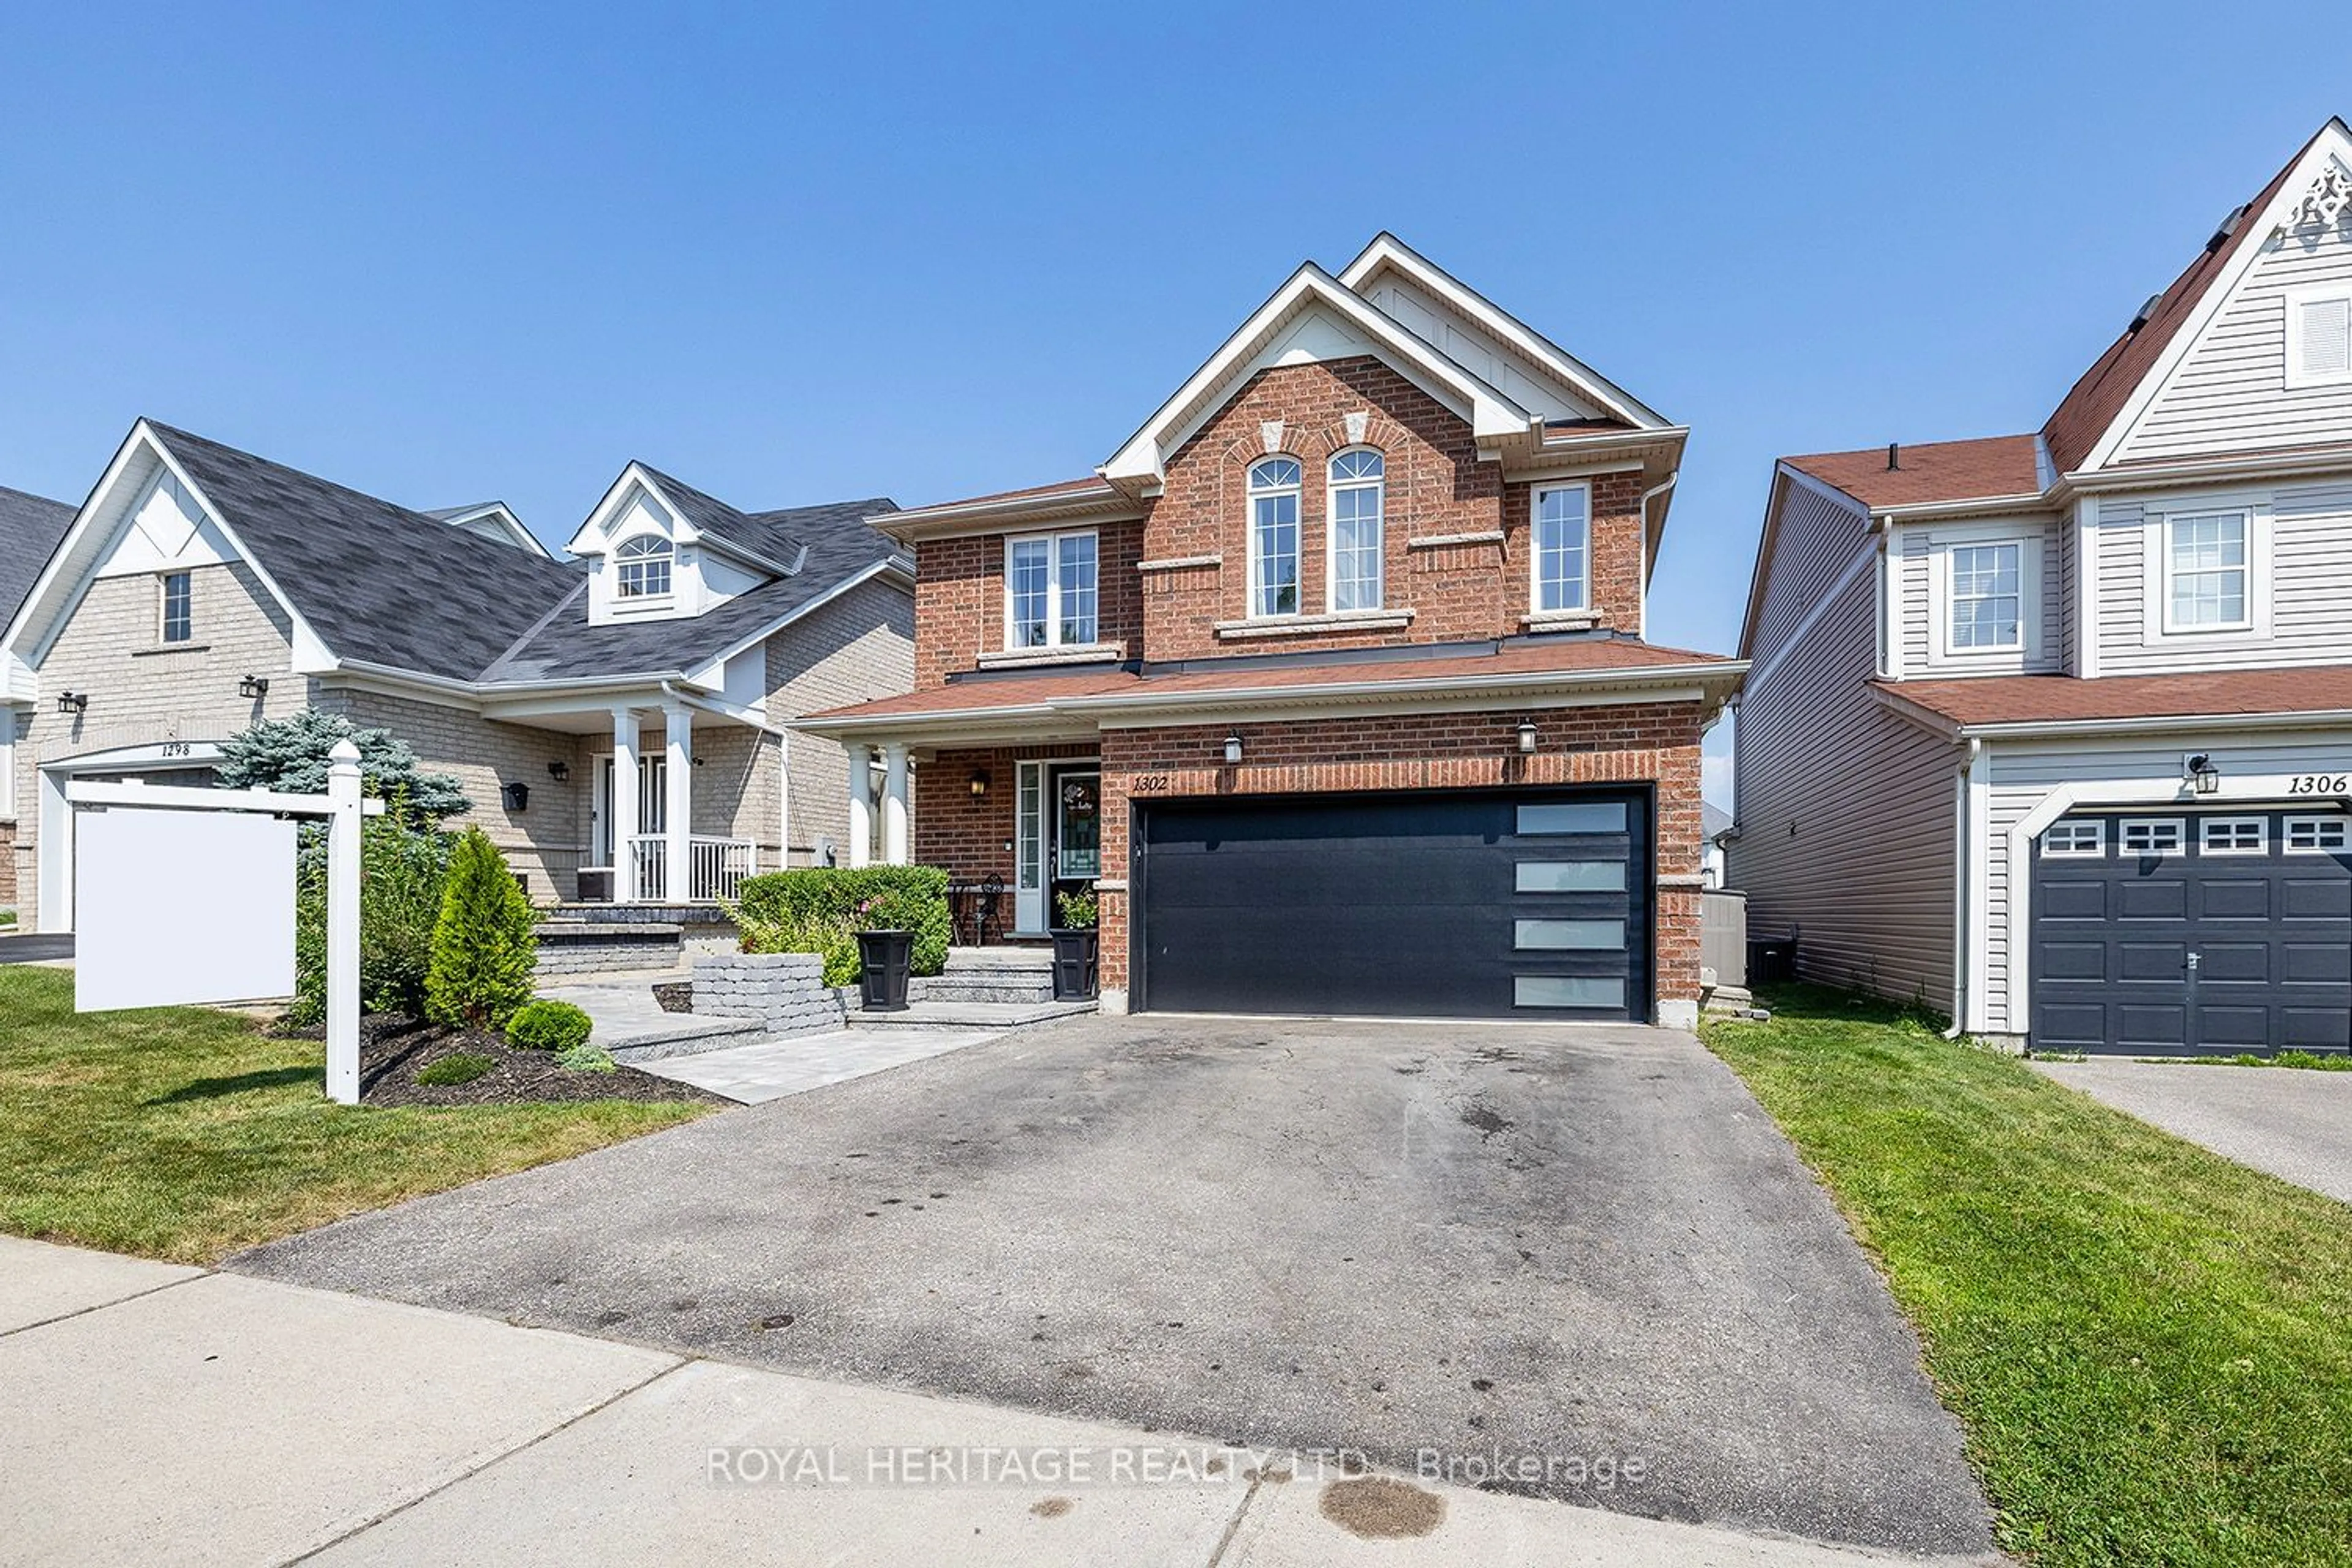 Home with brick exterior material for 1302 Whitelaw Ave, Oshawa Ontario L1K 0M6